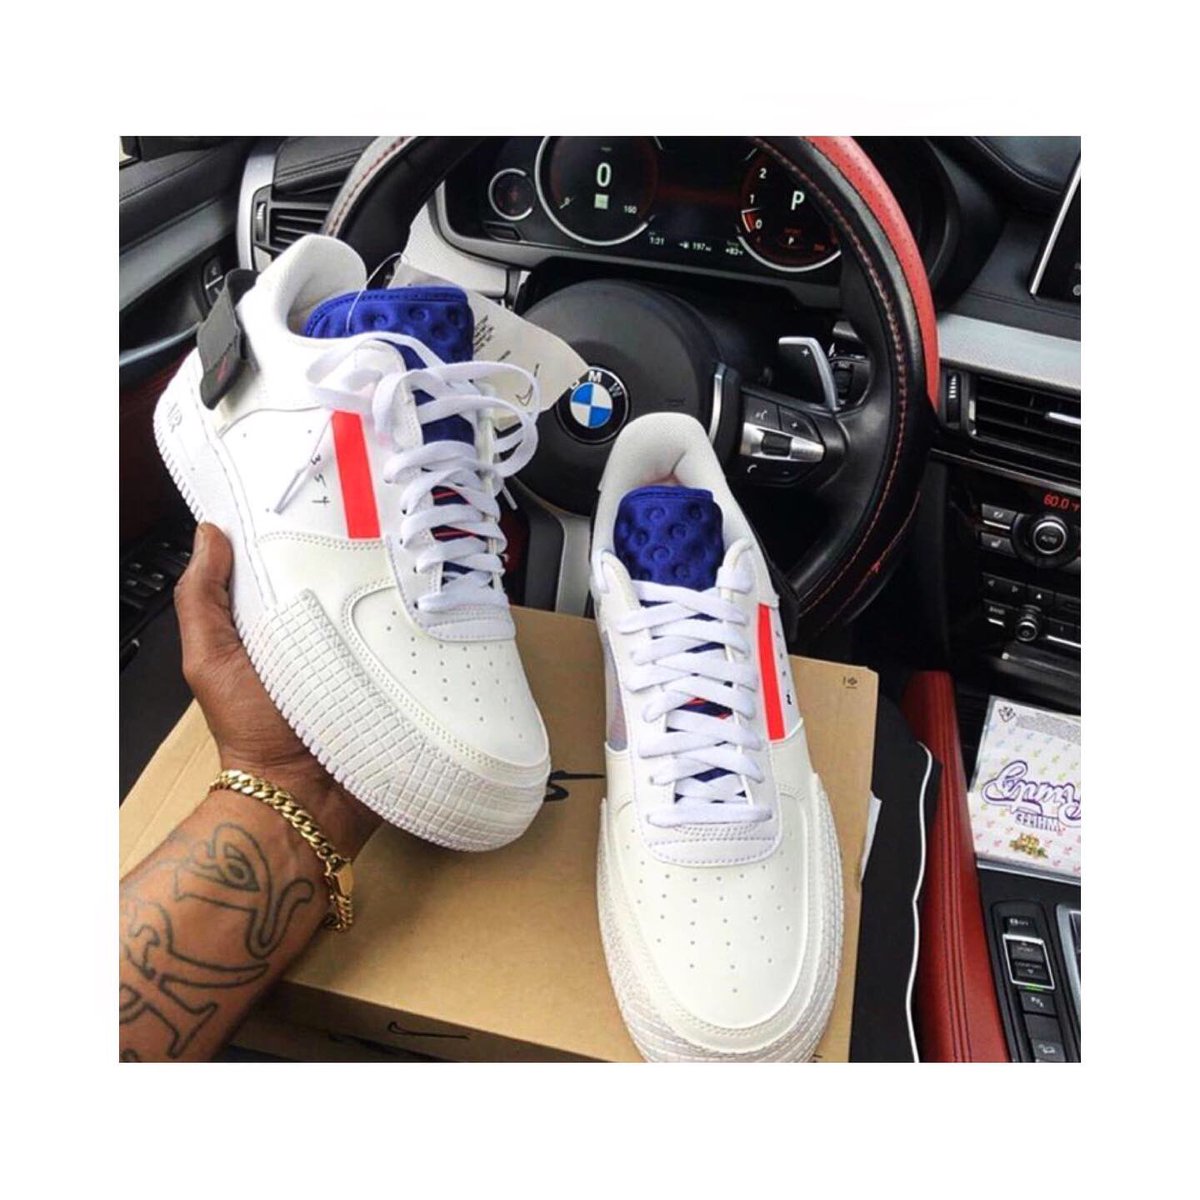 Never to be caught unfresh season it isCome through dripping in any our new sneakers this weekend now available in store Price: 25,000 eachSize: 39-45Same day delivery also available to your doorstep Pls help RT #Rihanna  #OwnIt  #BBNaija19